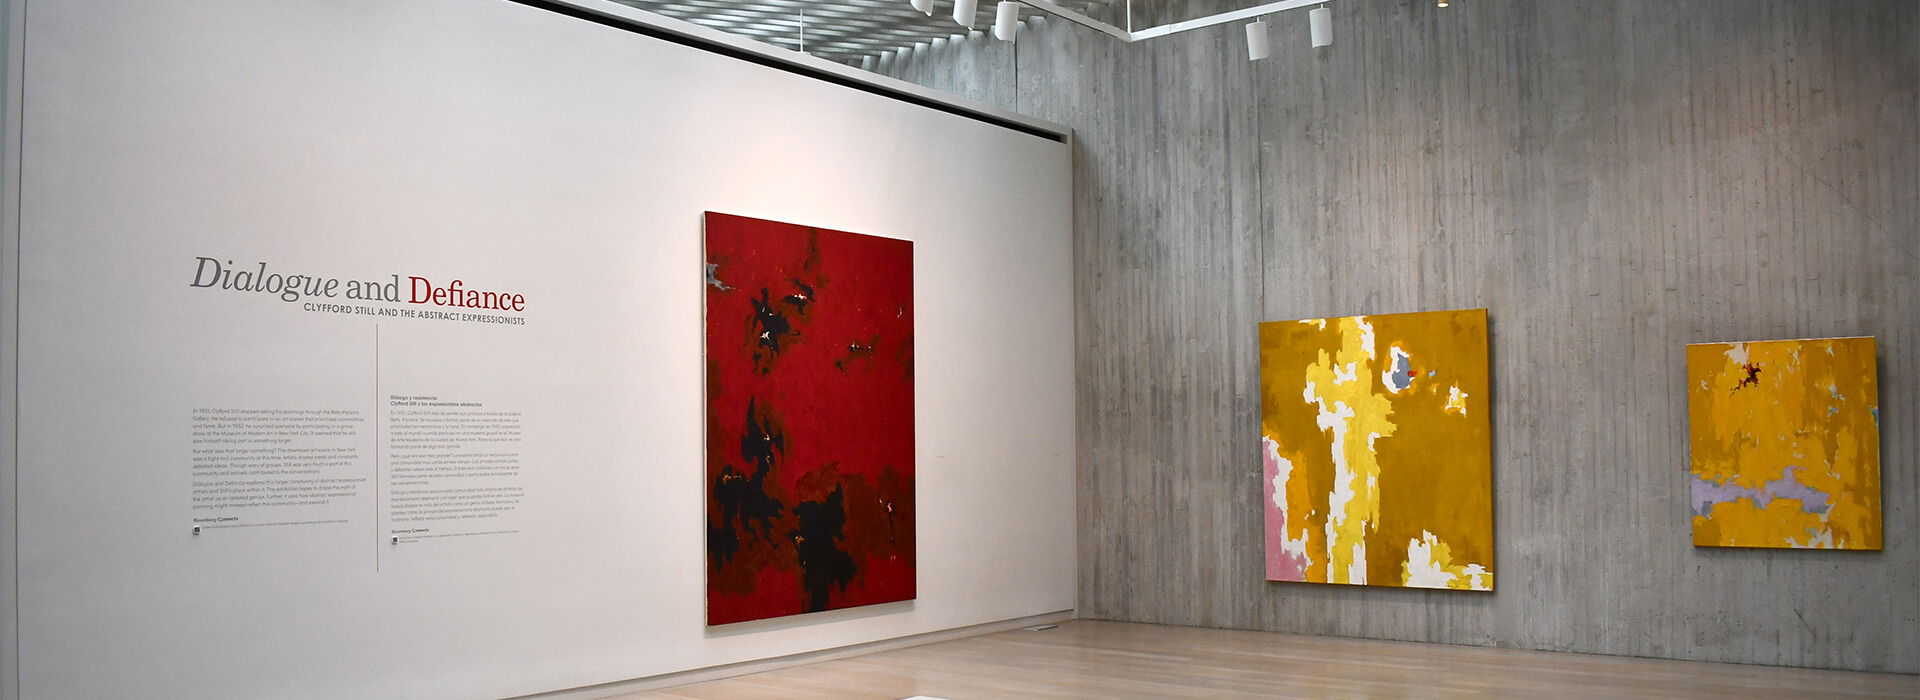 Empty gallery with red and yellow paintings and a bench